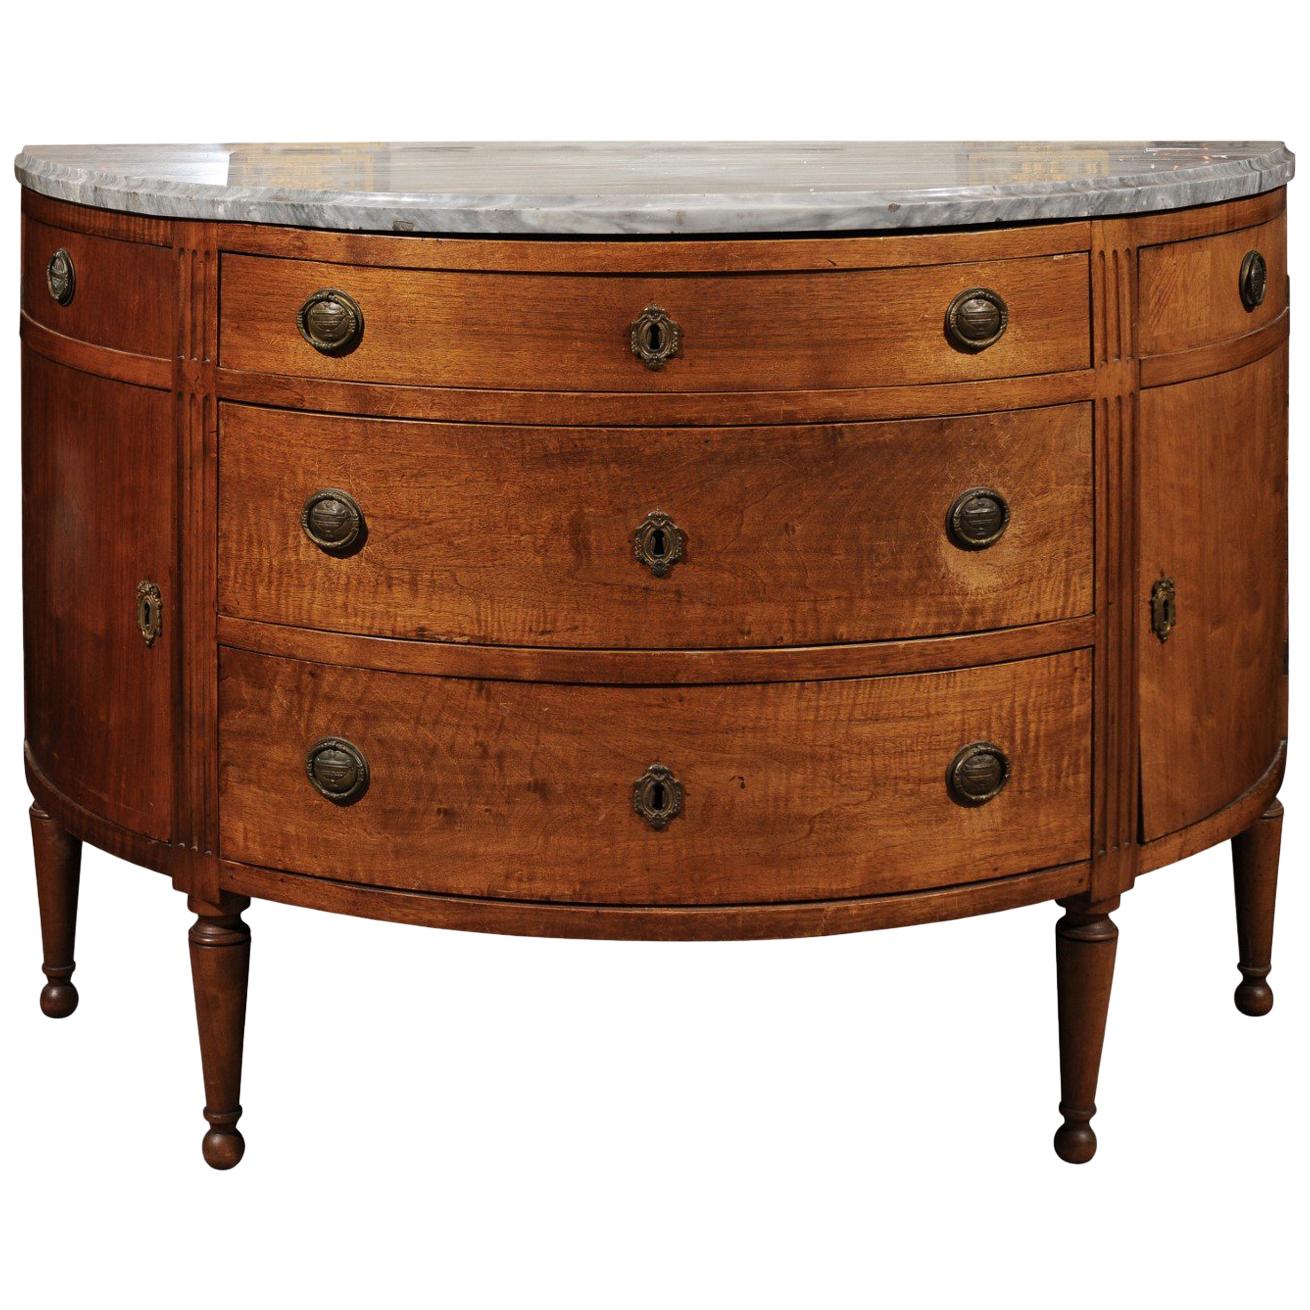 Italian Neoclassical Walnut Demilune Commode with Grey Marble Top, circa 1800